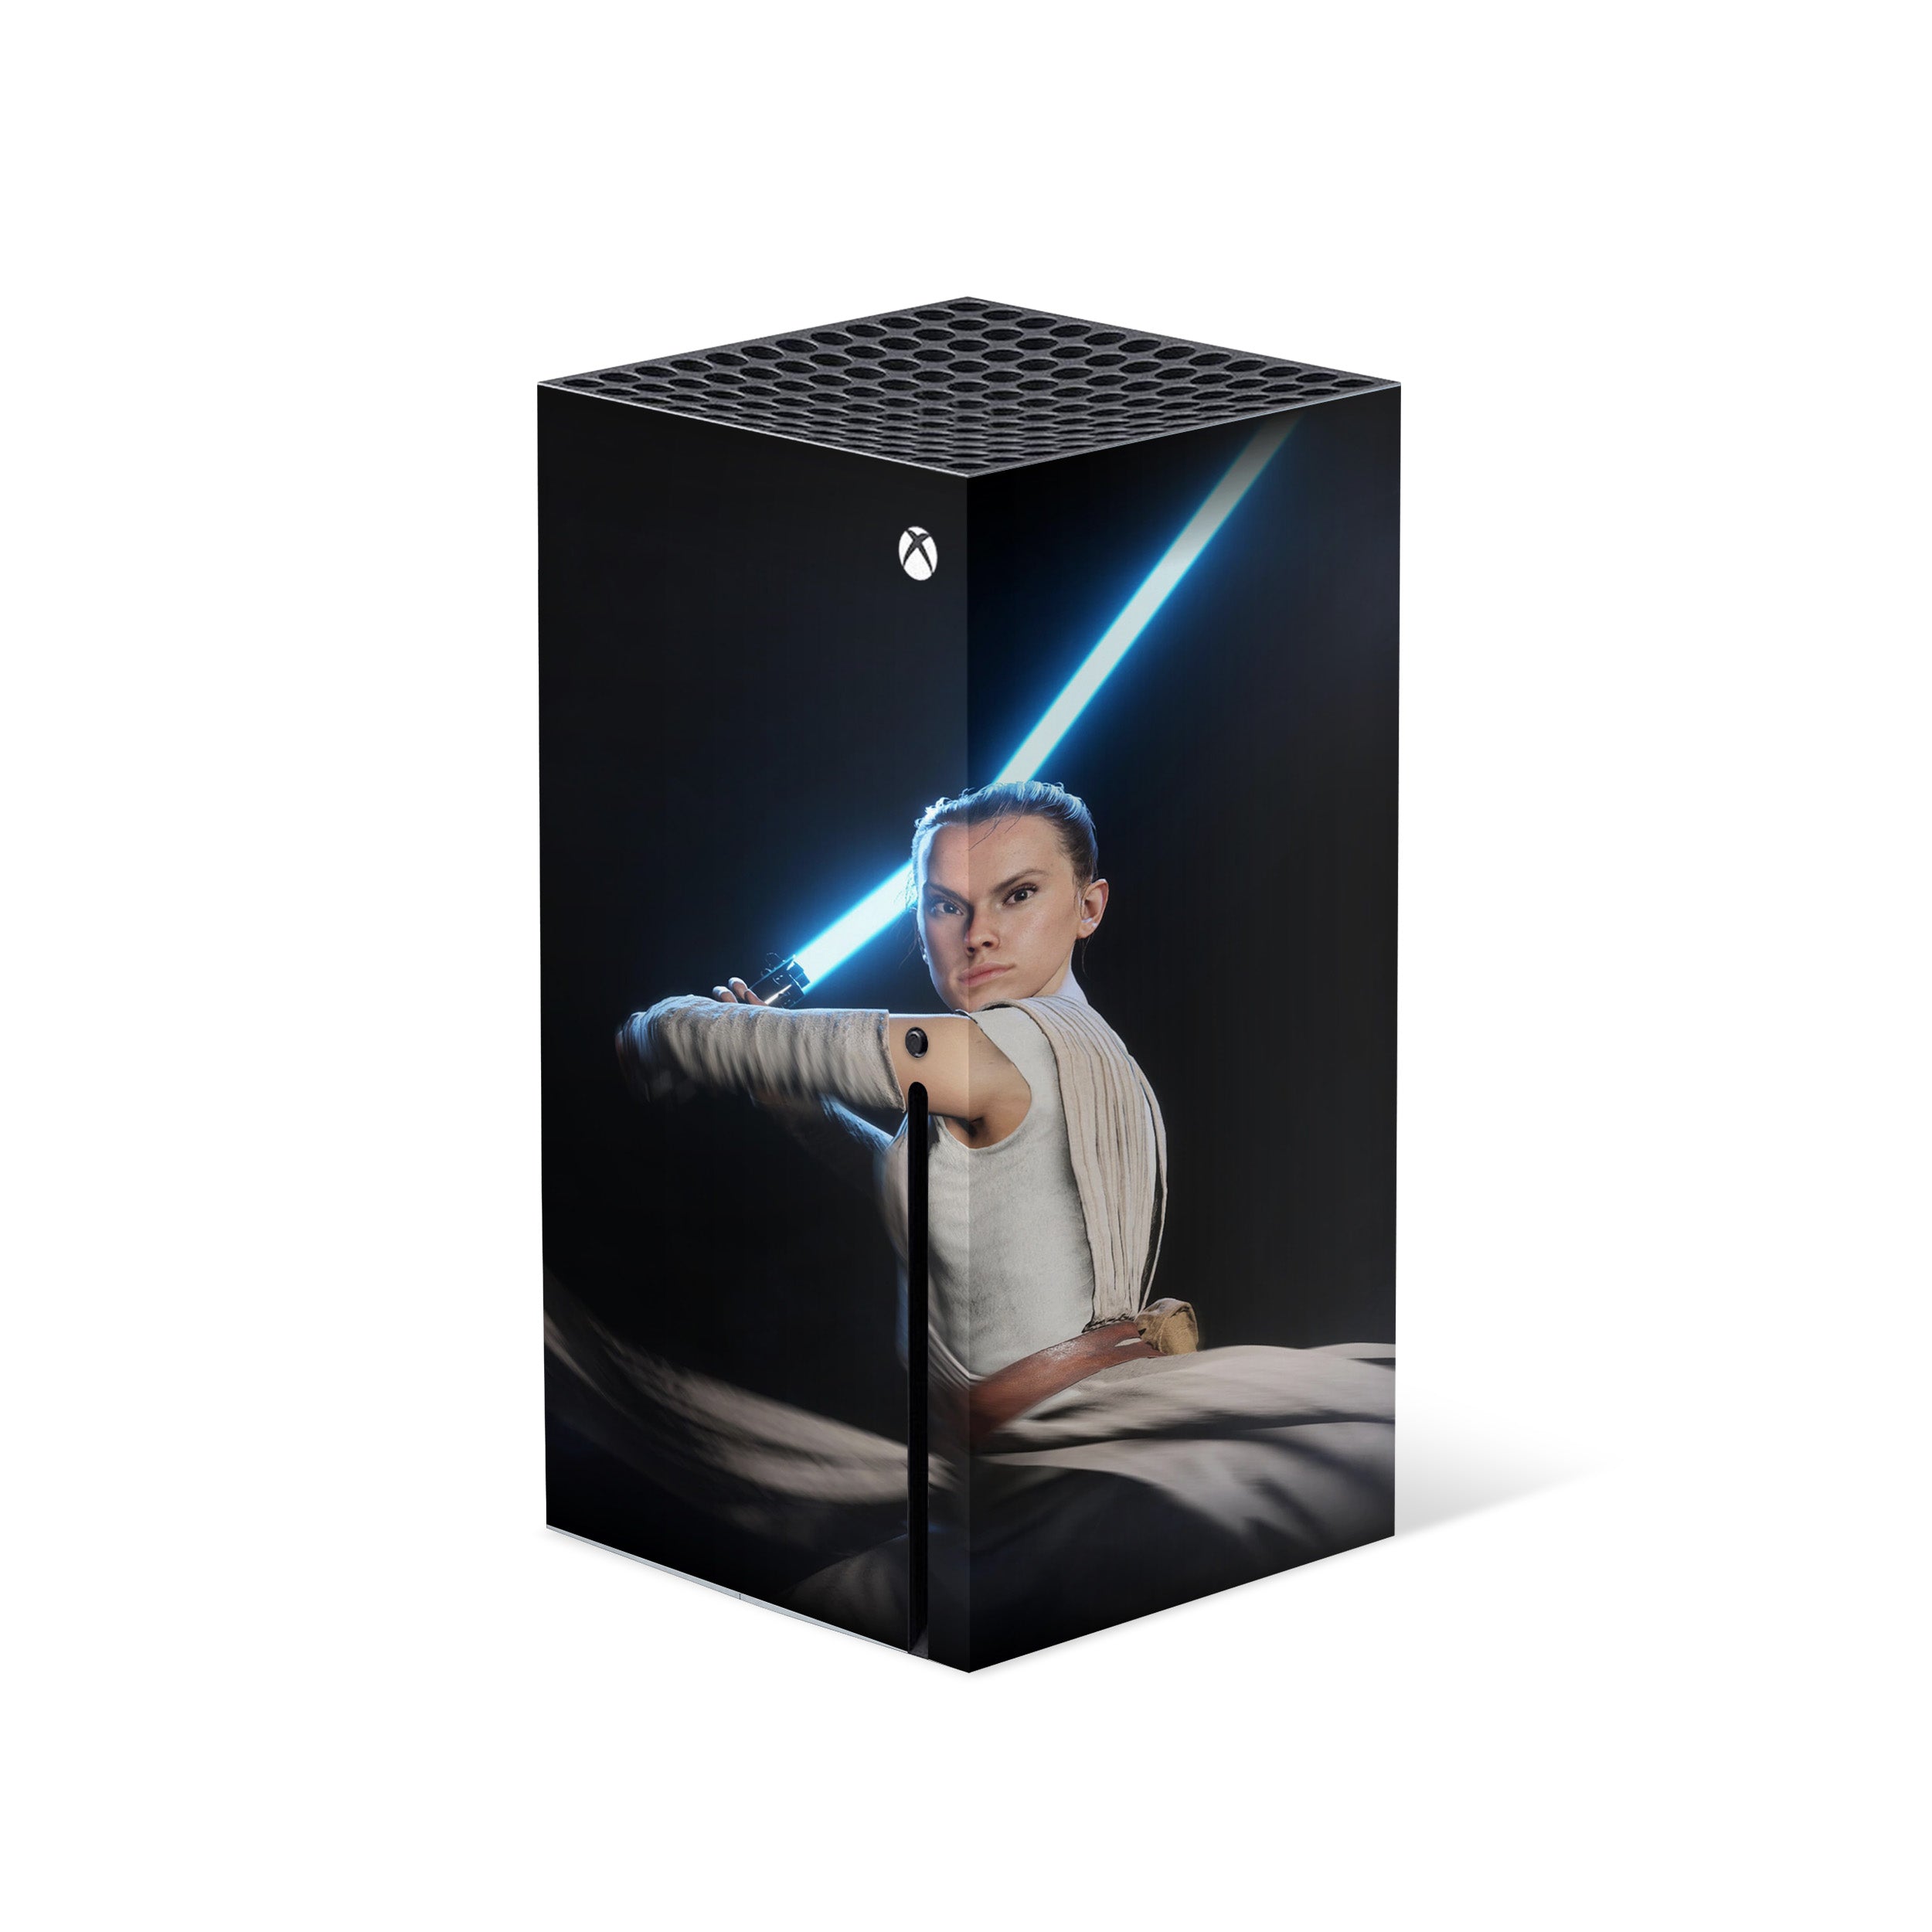 A video game skin featuring a Star Wars Rey design for the Xbox Series X.